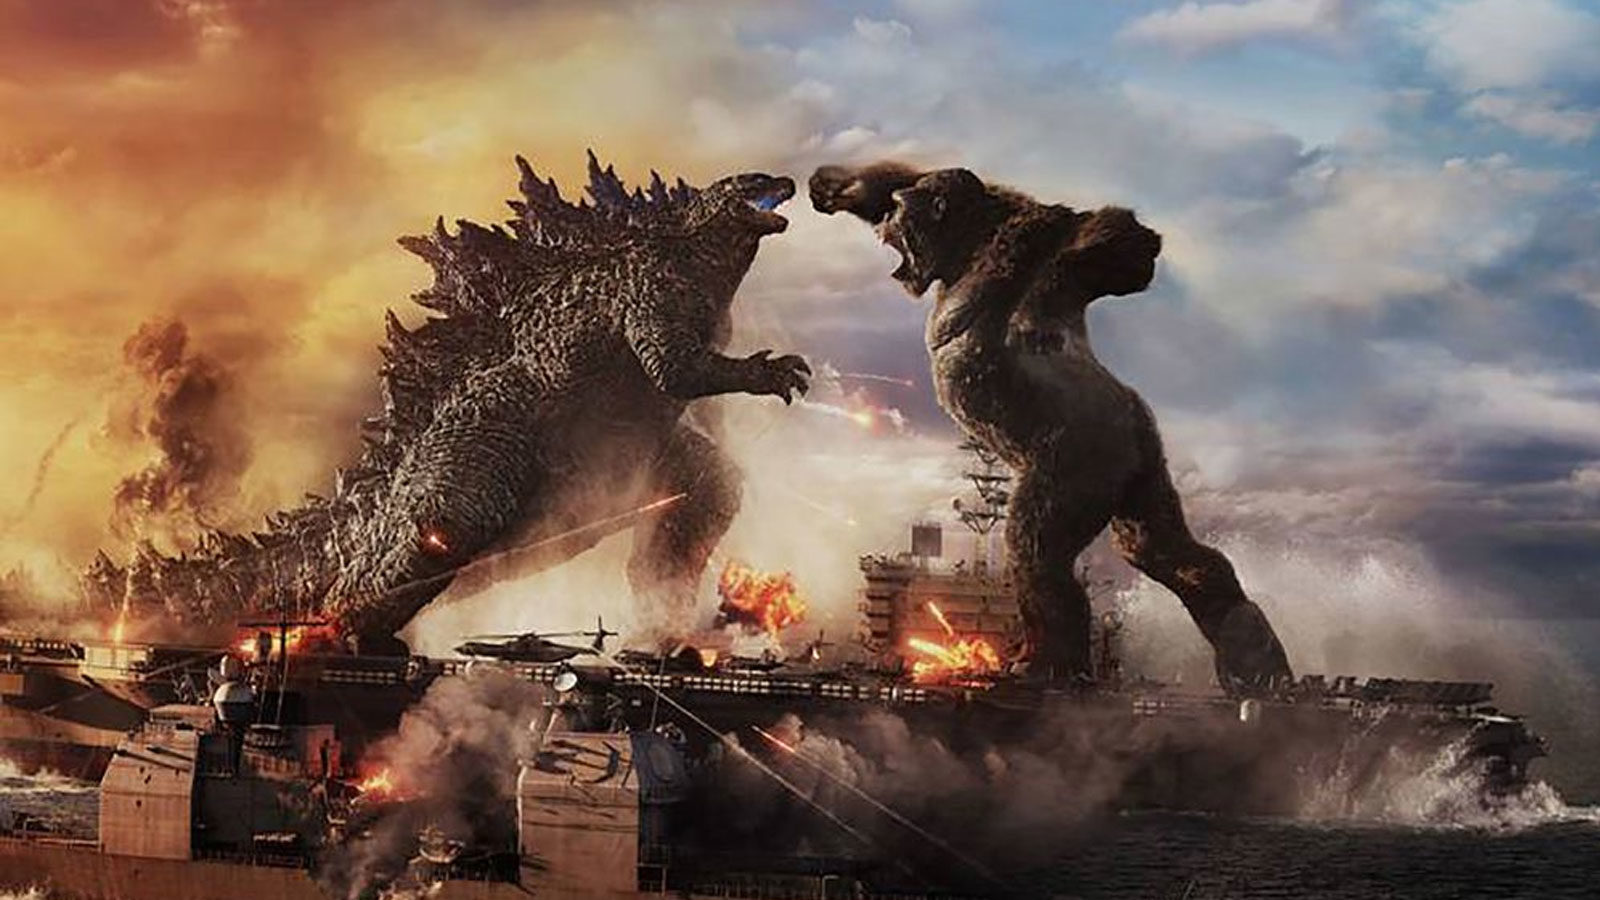 ‘Godzilla vs. Kong’ Becomes Top-Grossing Movie in Pandemic